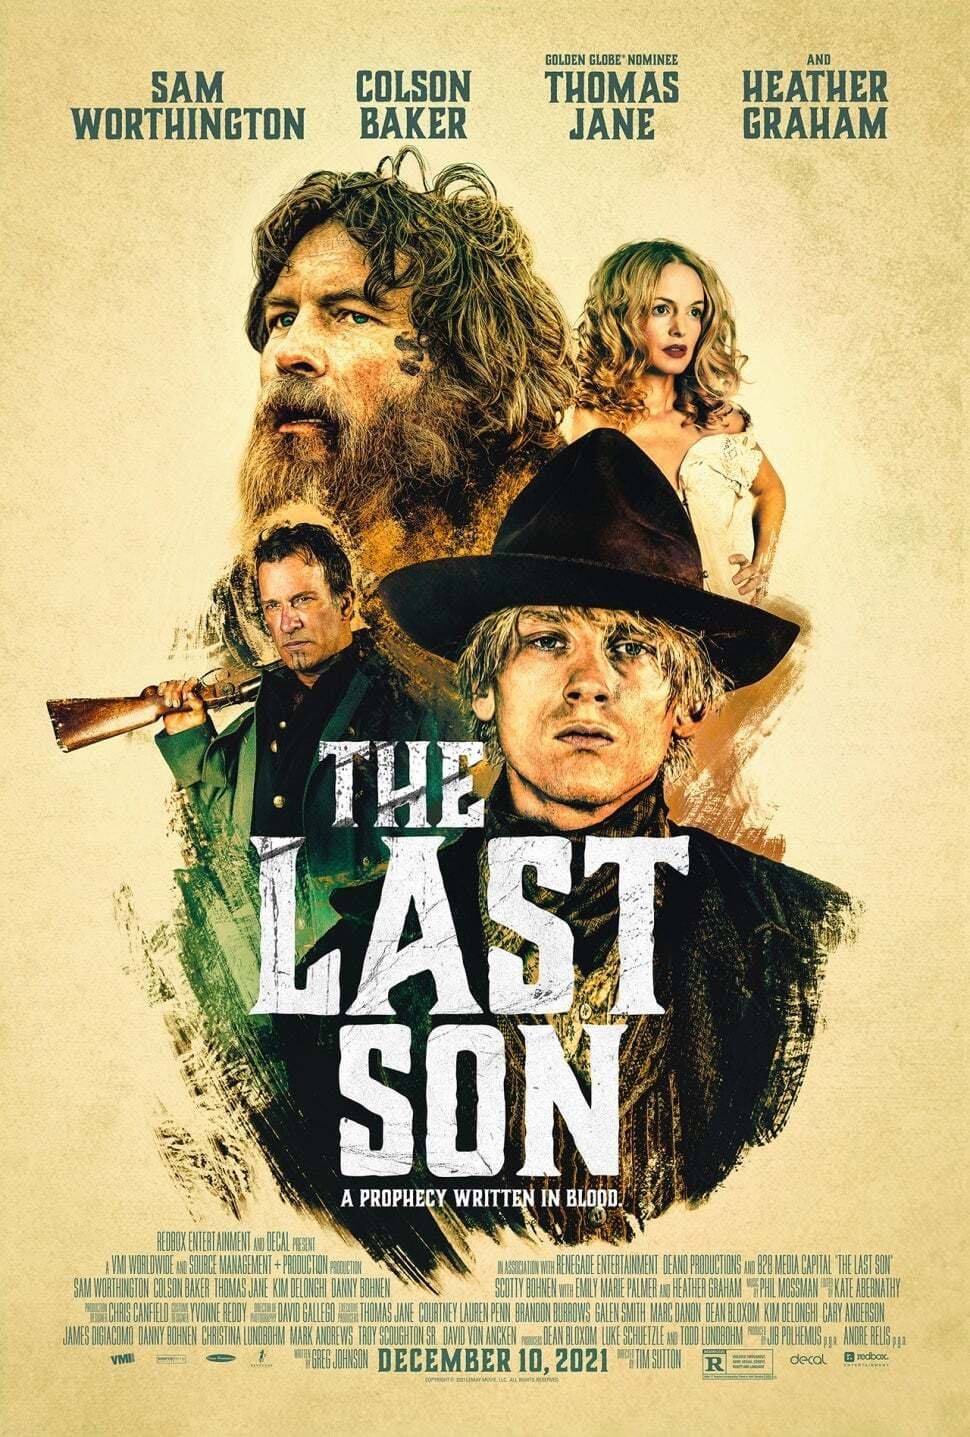 Poster for the movie "The Last Son"